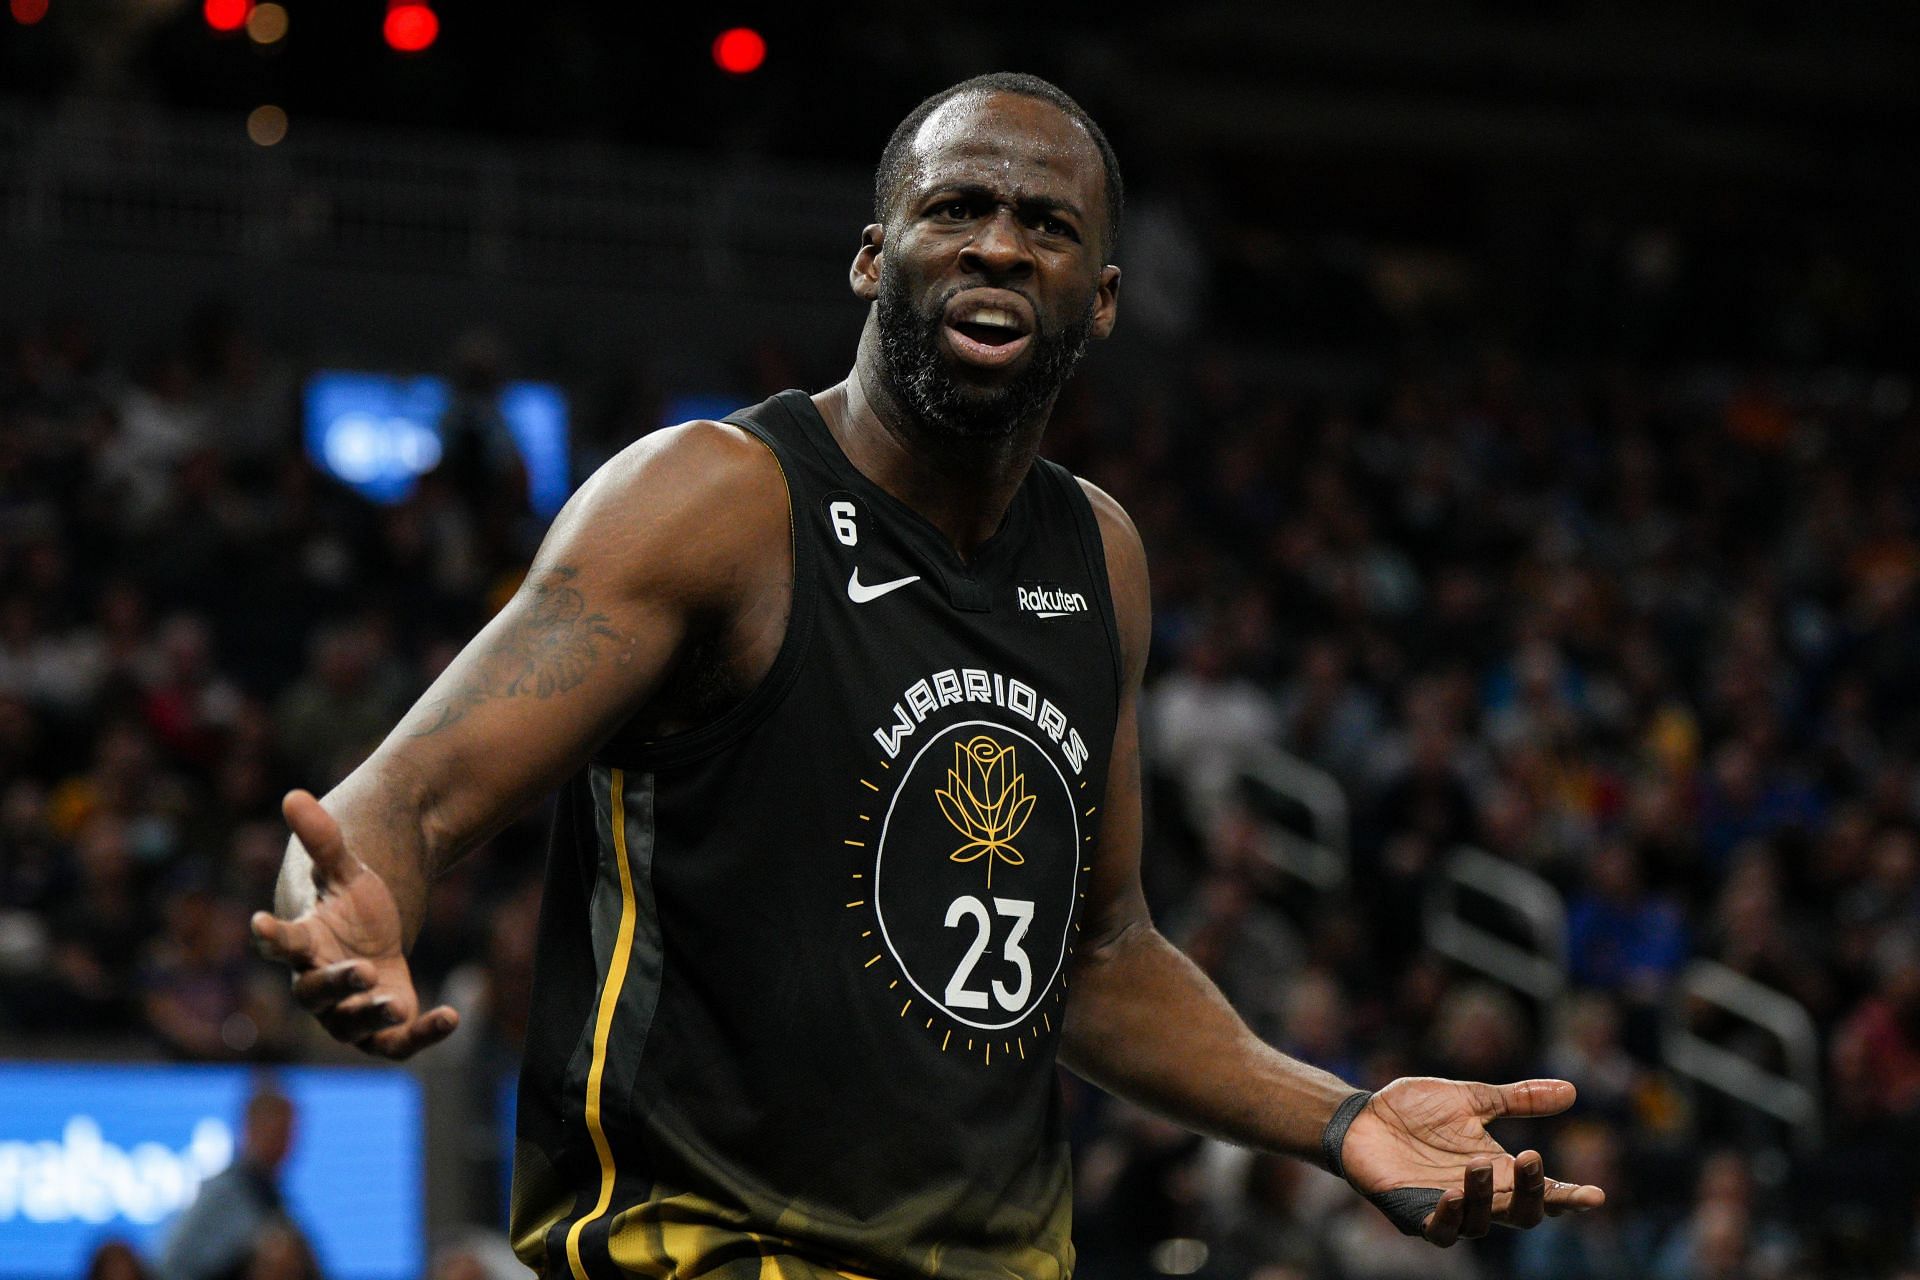 Draymond Green lashed back at the referees for allowing the Sacramento Kings to grab his leg.